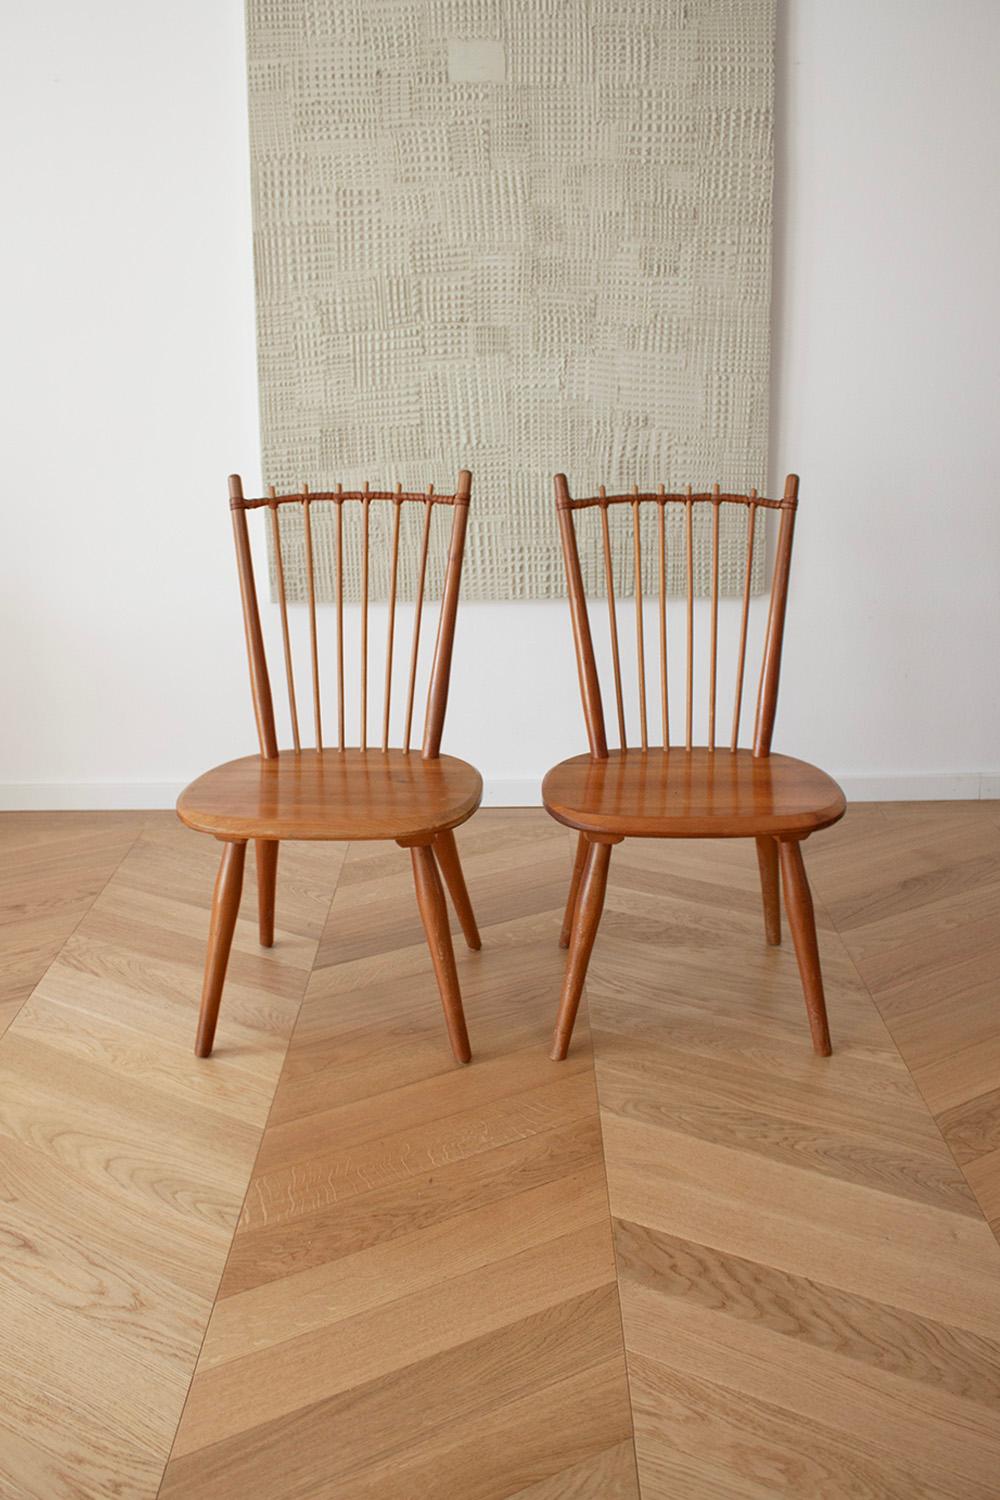 This rare set of 2 dining chairs are designed by Albert Haberer and manufactured by Hermann Fleiner, Germany in ca 1950. These chairs are beautifully crafted with attention to detail. The backrest spindles are skillfully connected with a leather